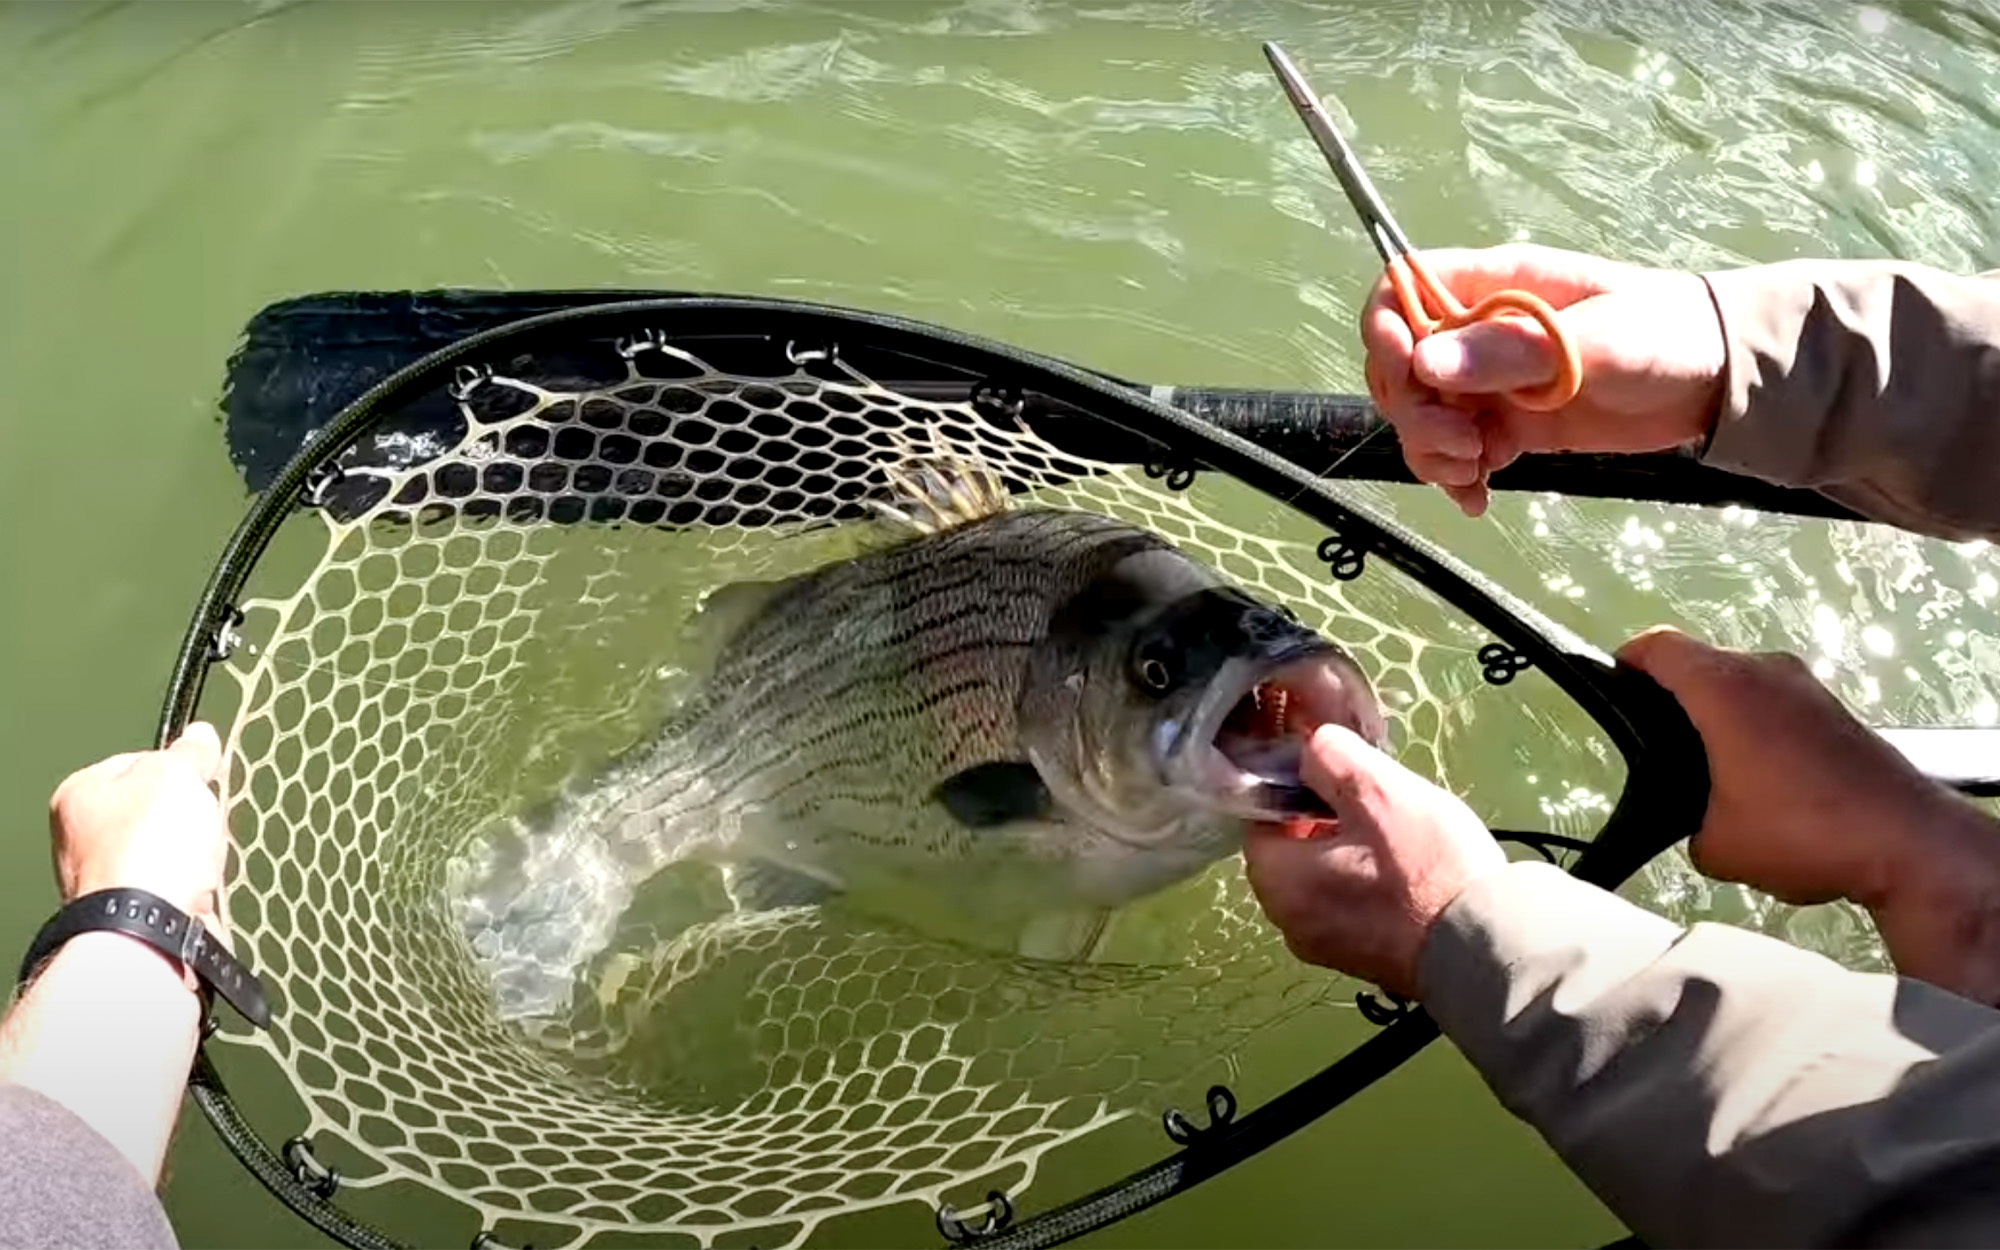 A giant hybrid bass caught on the fly.